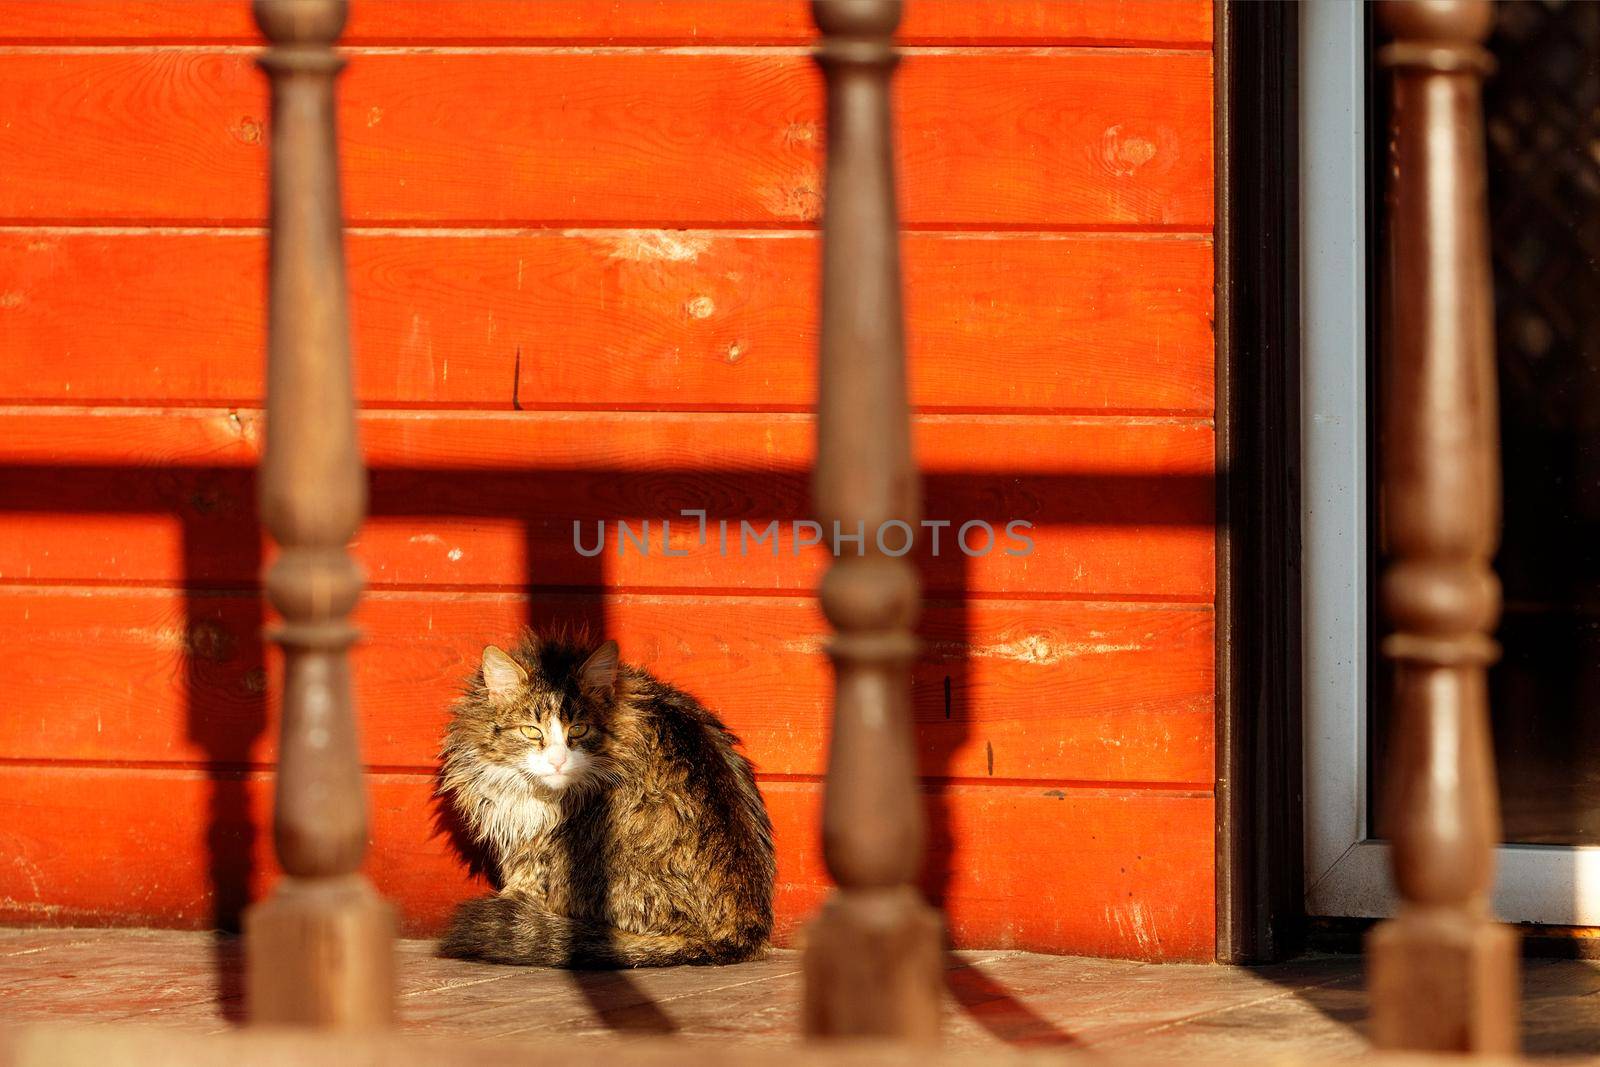 An alert funny cat with pulled-up fur sits on the veranda of the wooden house in the bright orange light of the setting sun. Long shadows from the railings fall on the facade of the house and the cat.